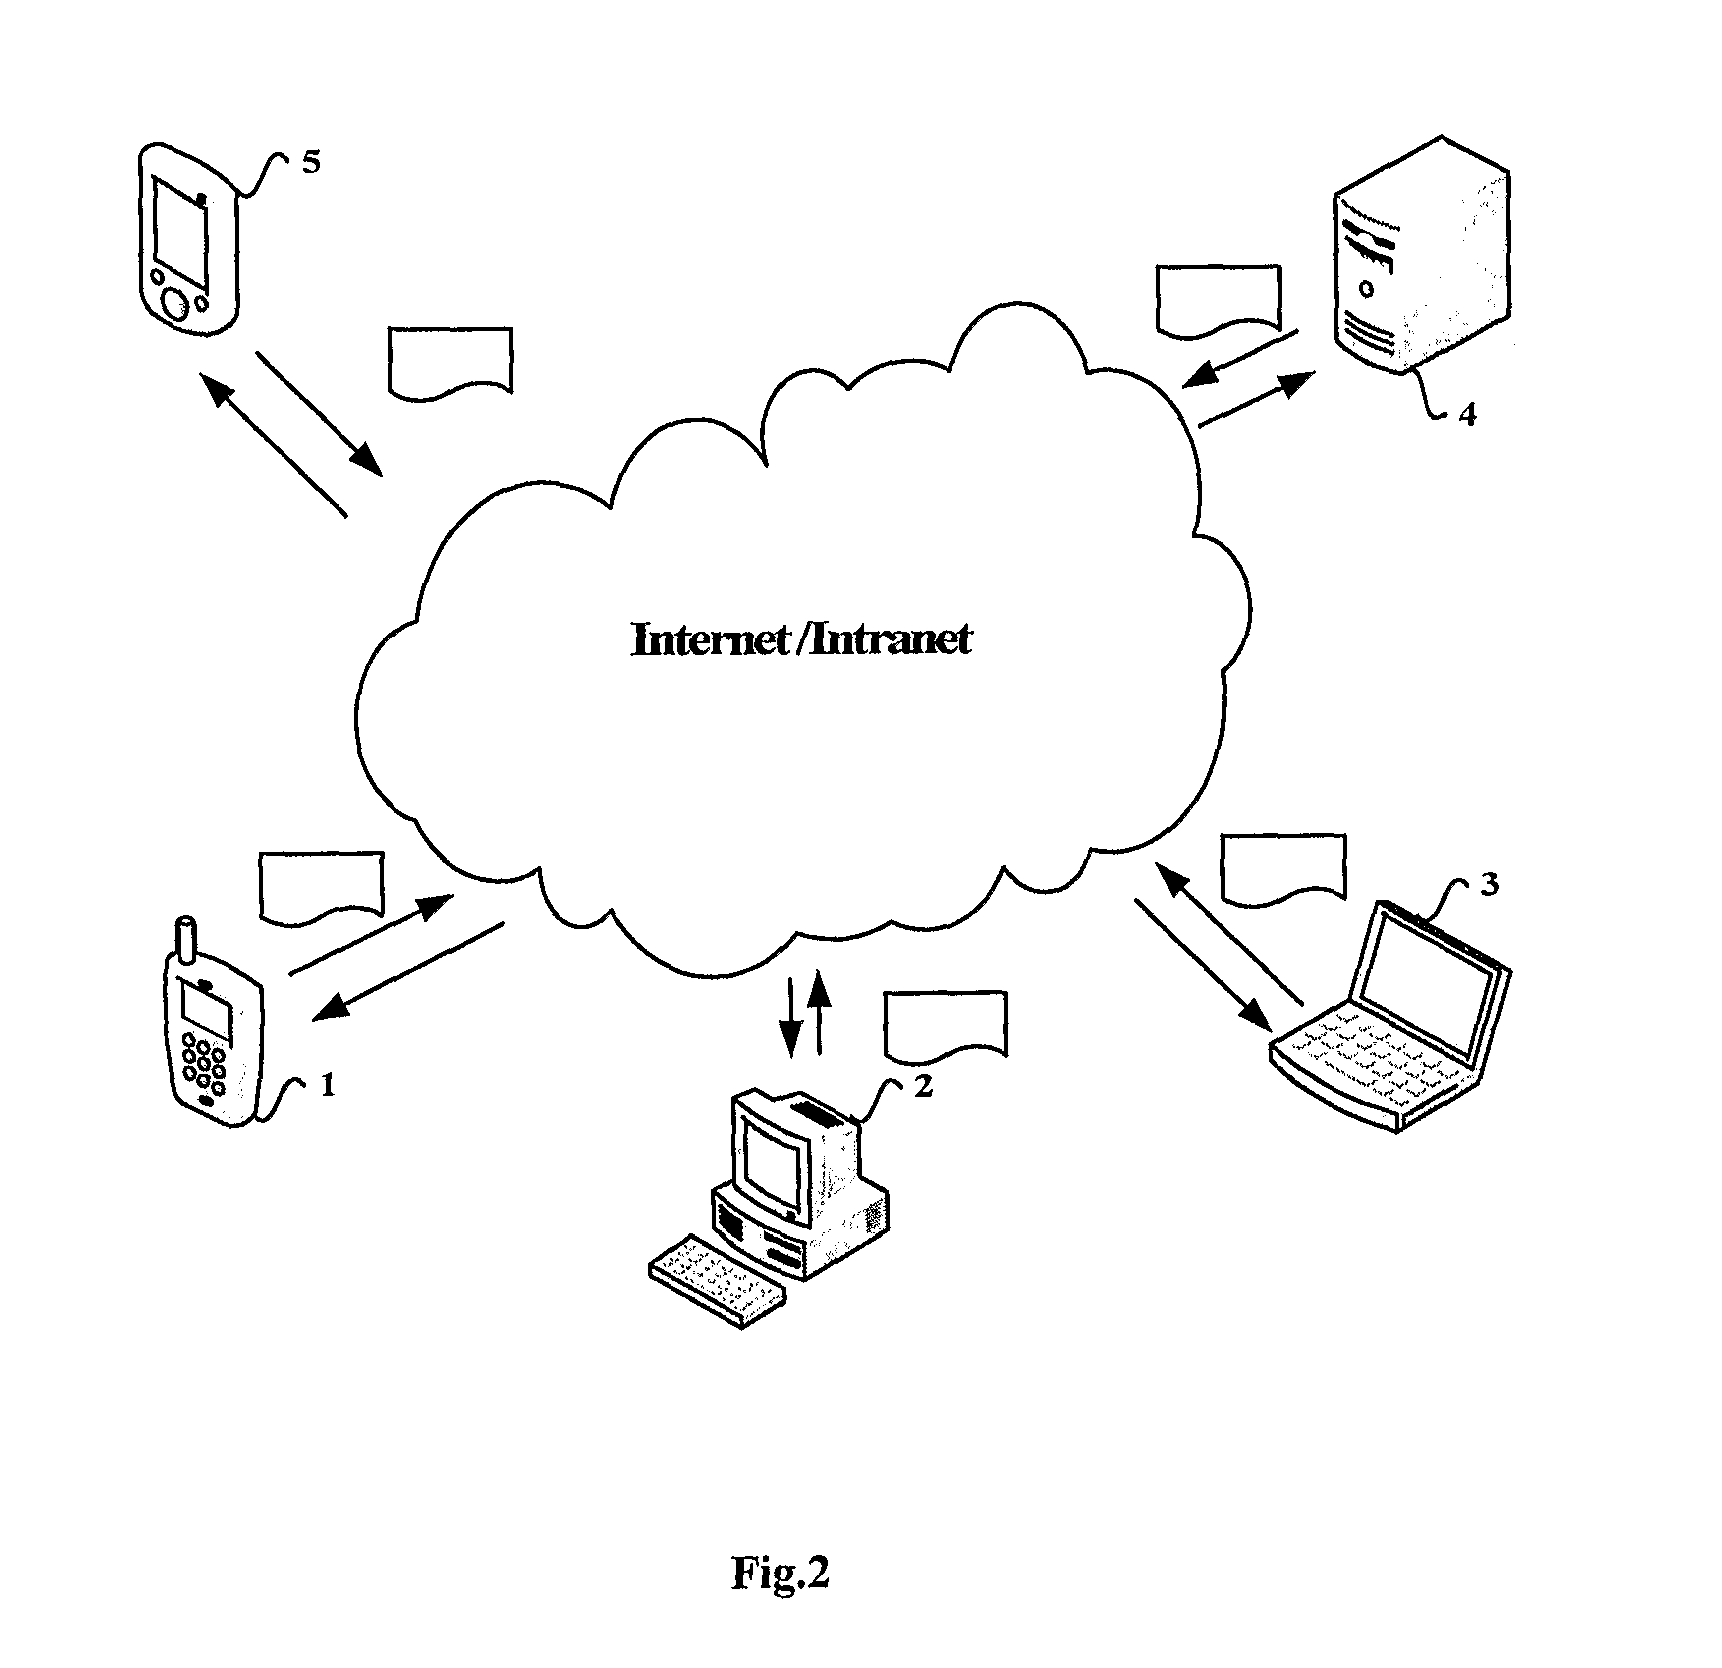 The method and apparatus for the resource sharing between user devices in computer network